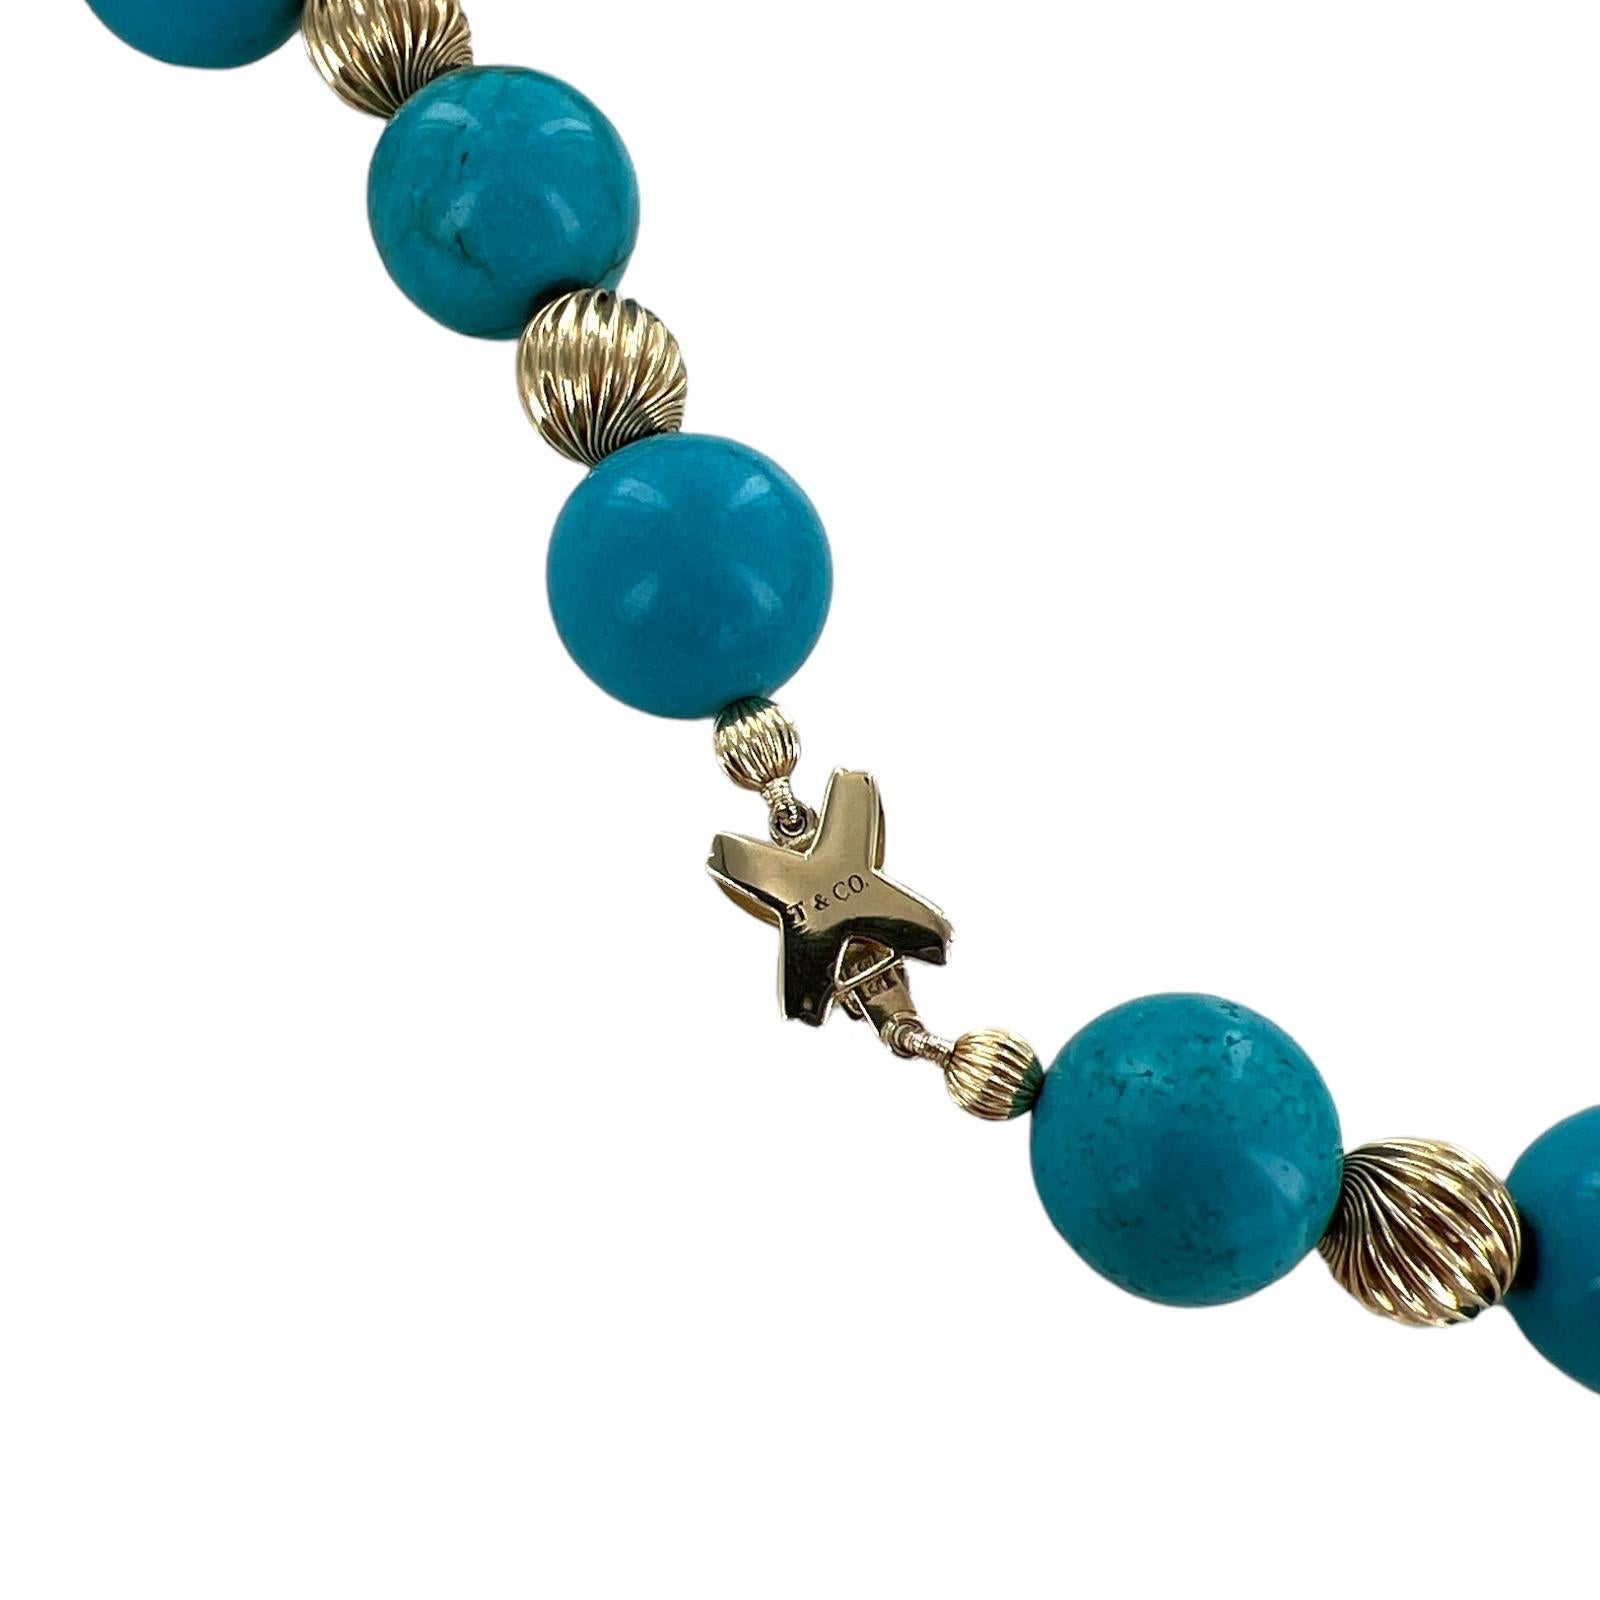 Modern Tiffany & Co. Turquoise Bead 14 Karat Yellow Gold x Clasp Estate Necklace